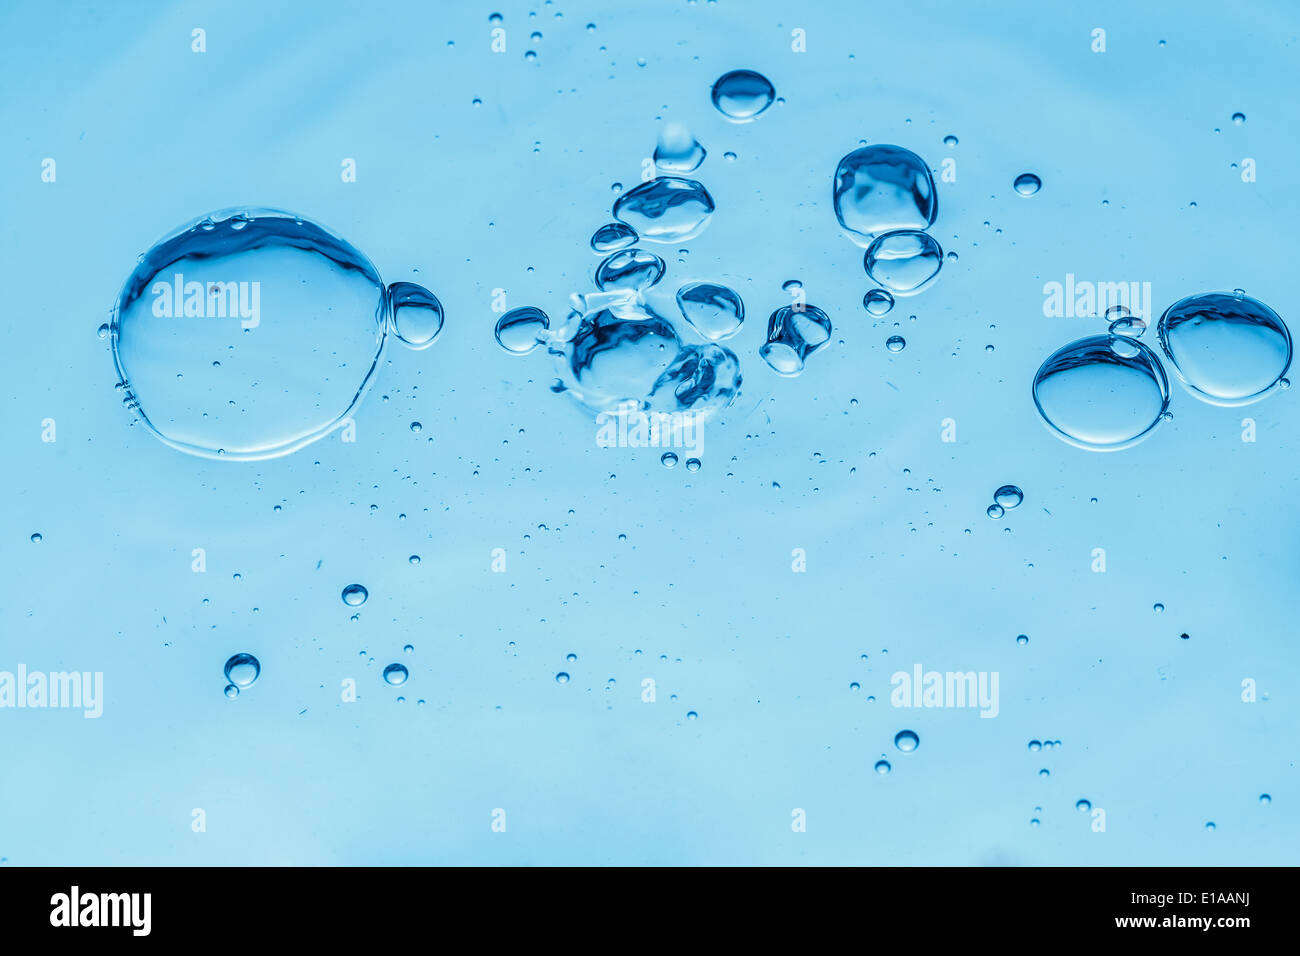 very nice abstract background of blue water drops from splash Stock Photo